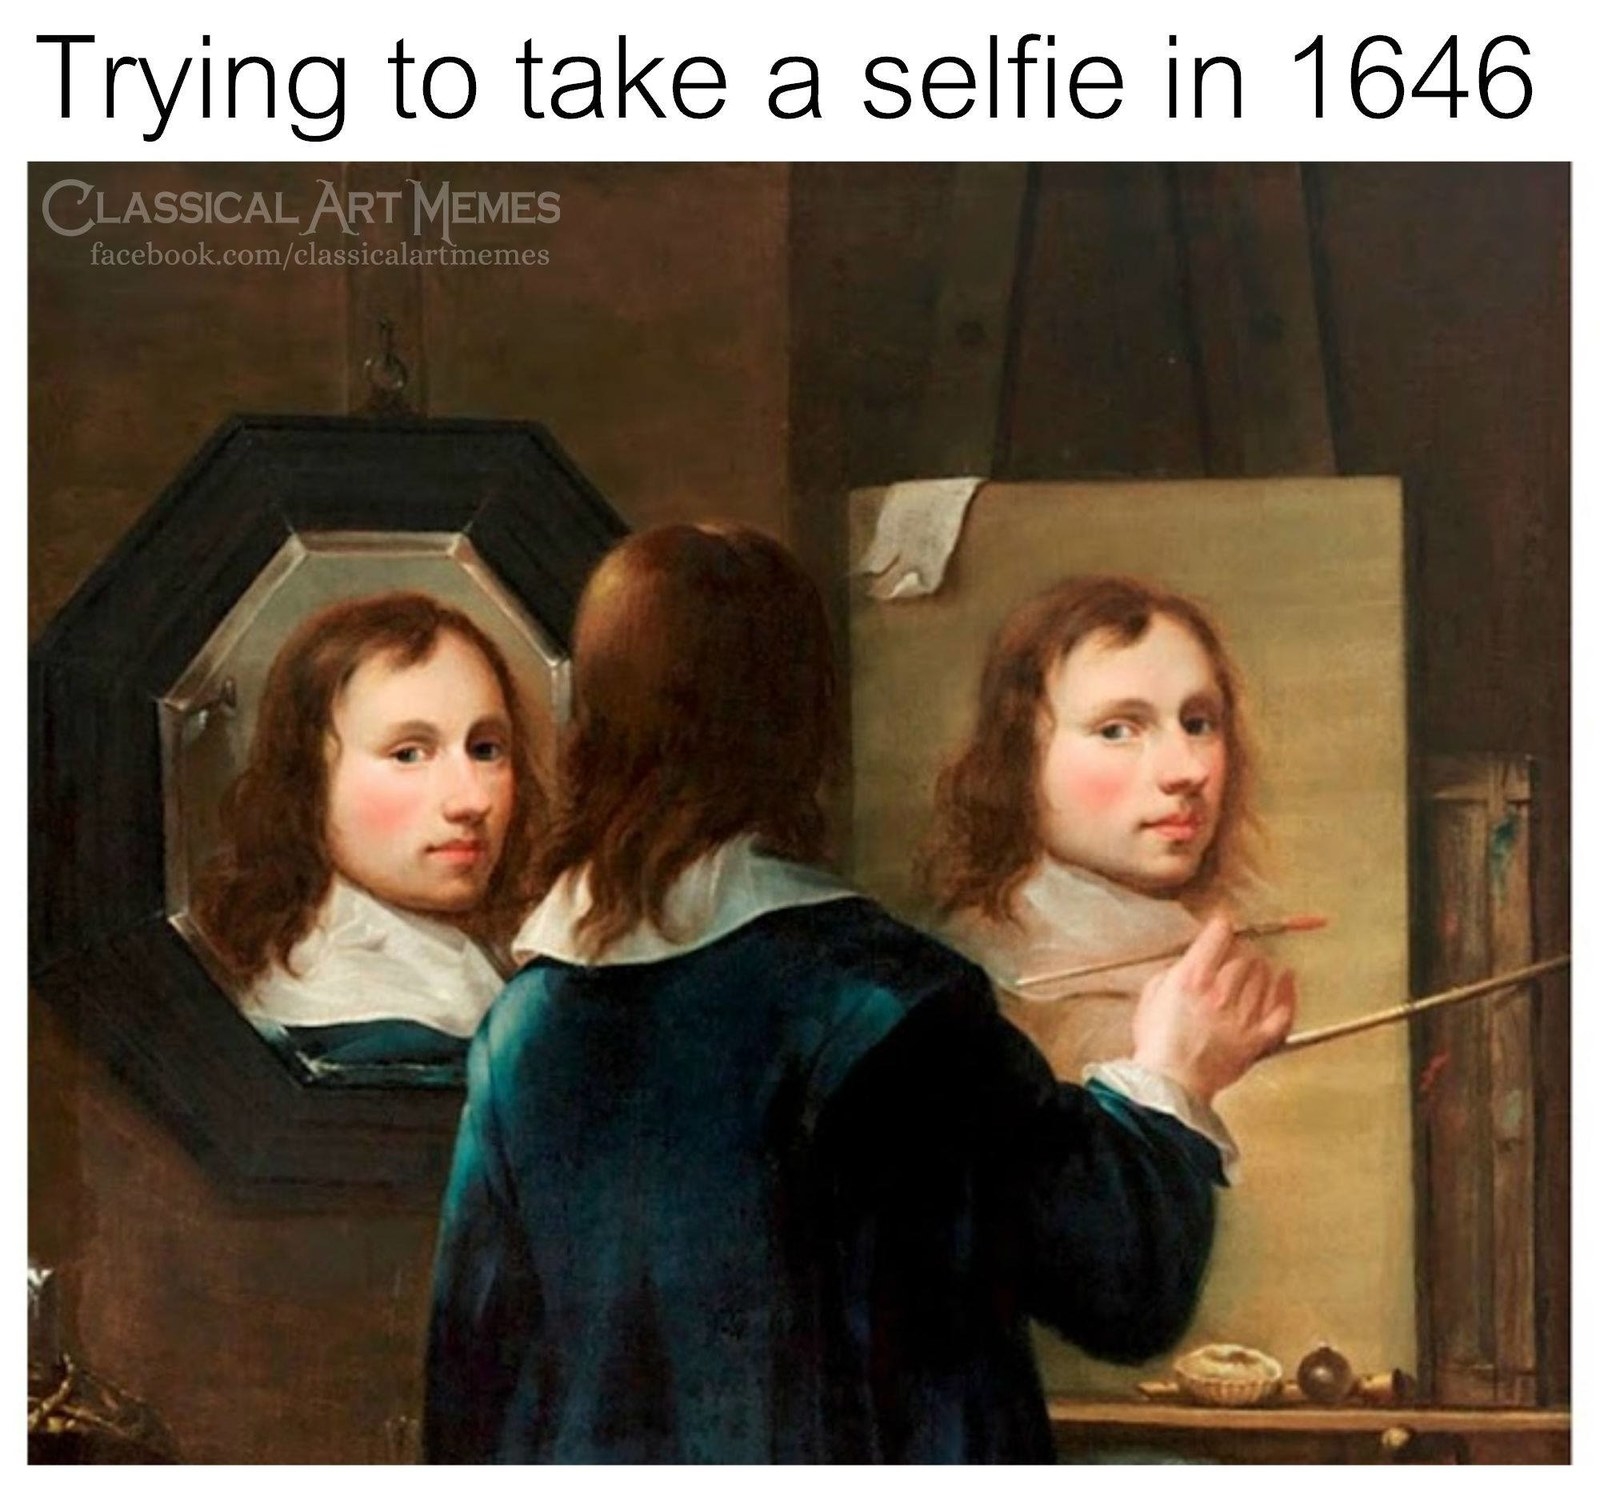 50 Classical Art Memes That Will Keep You Laughing For Hours